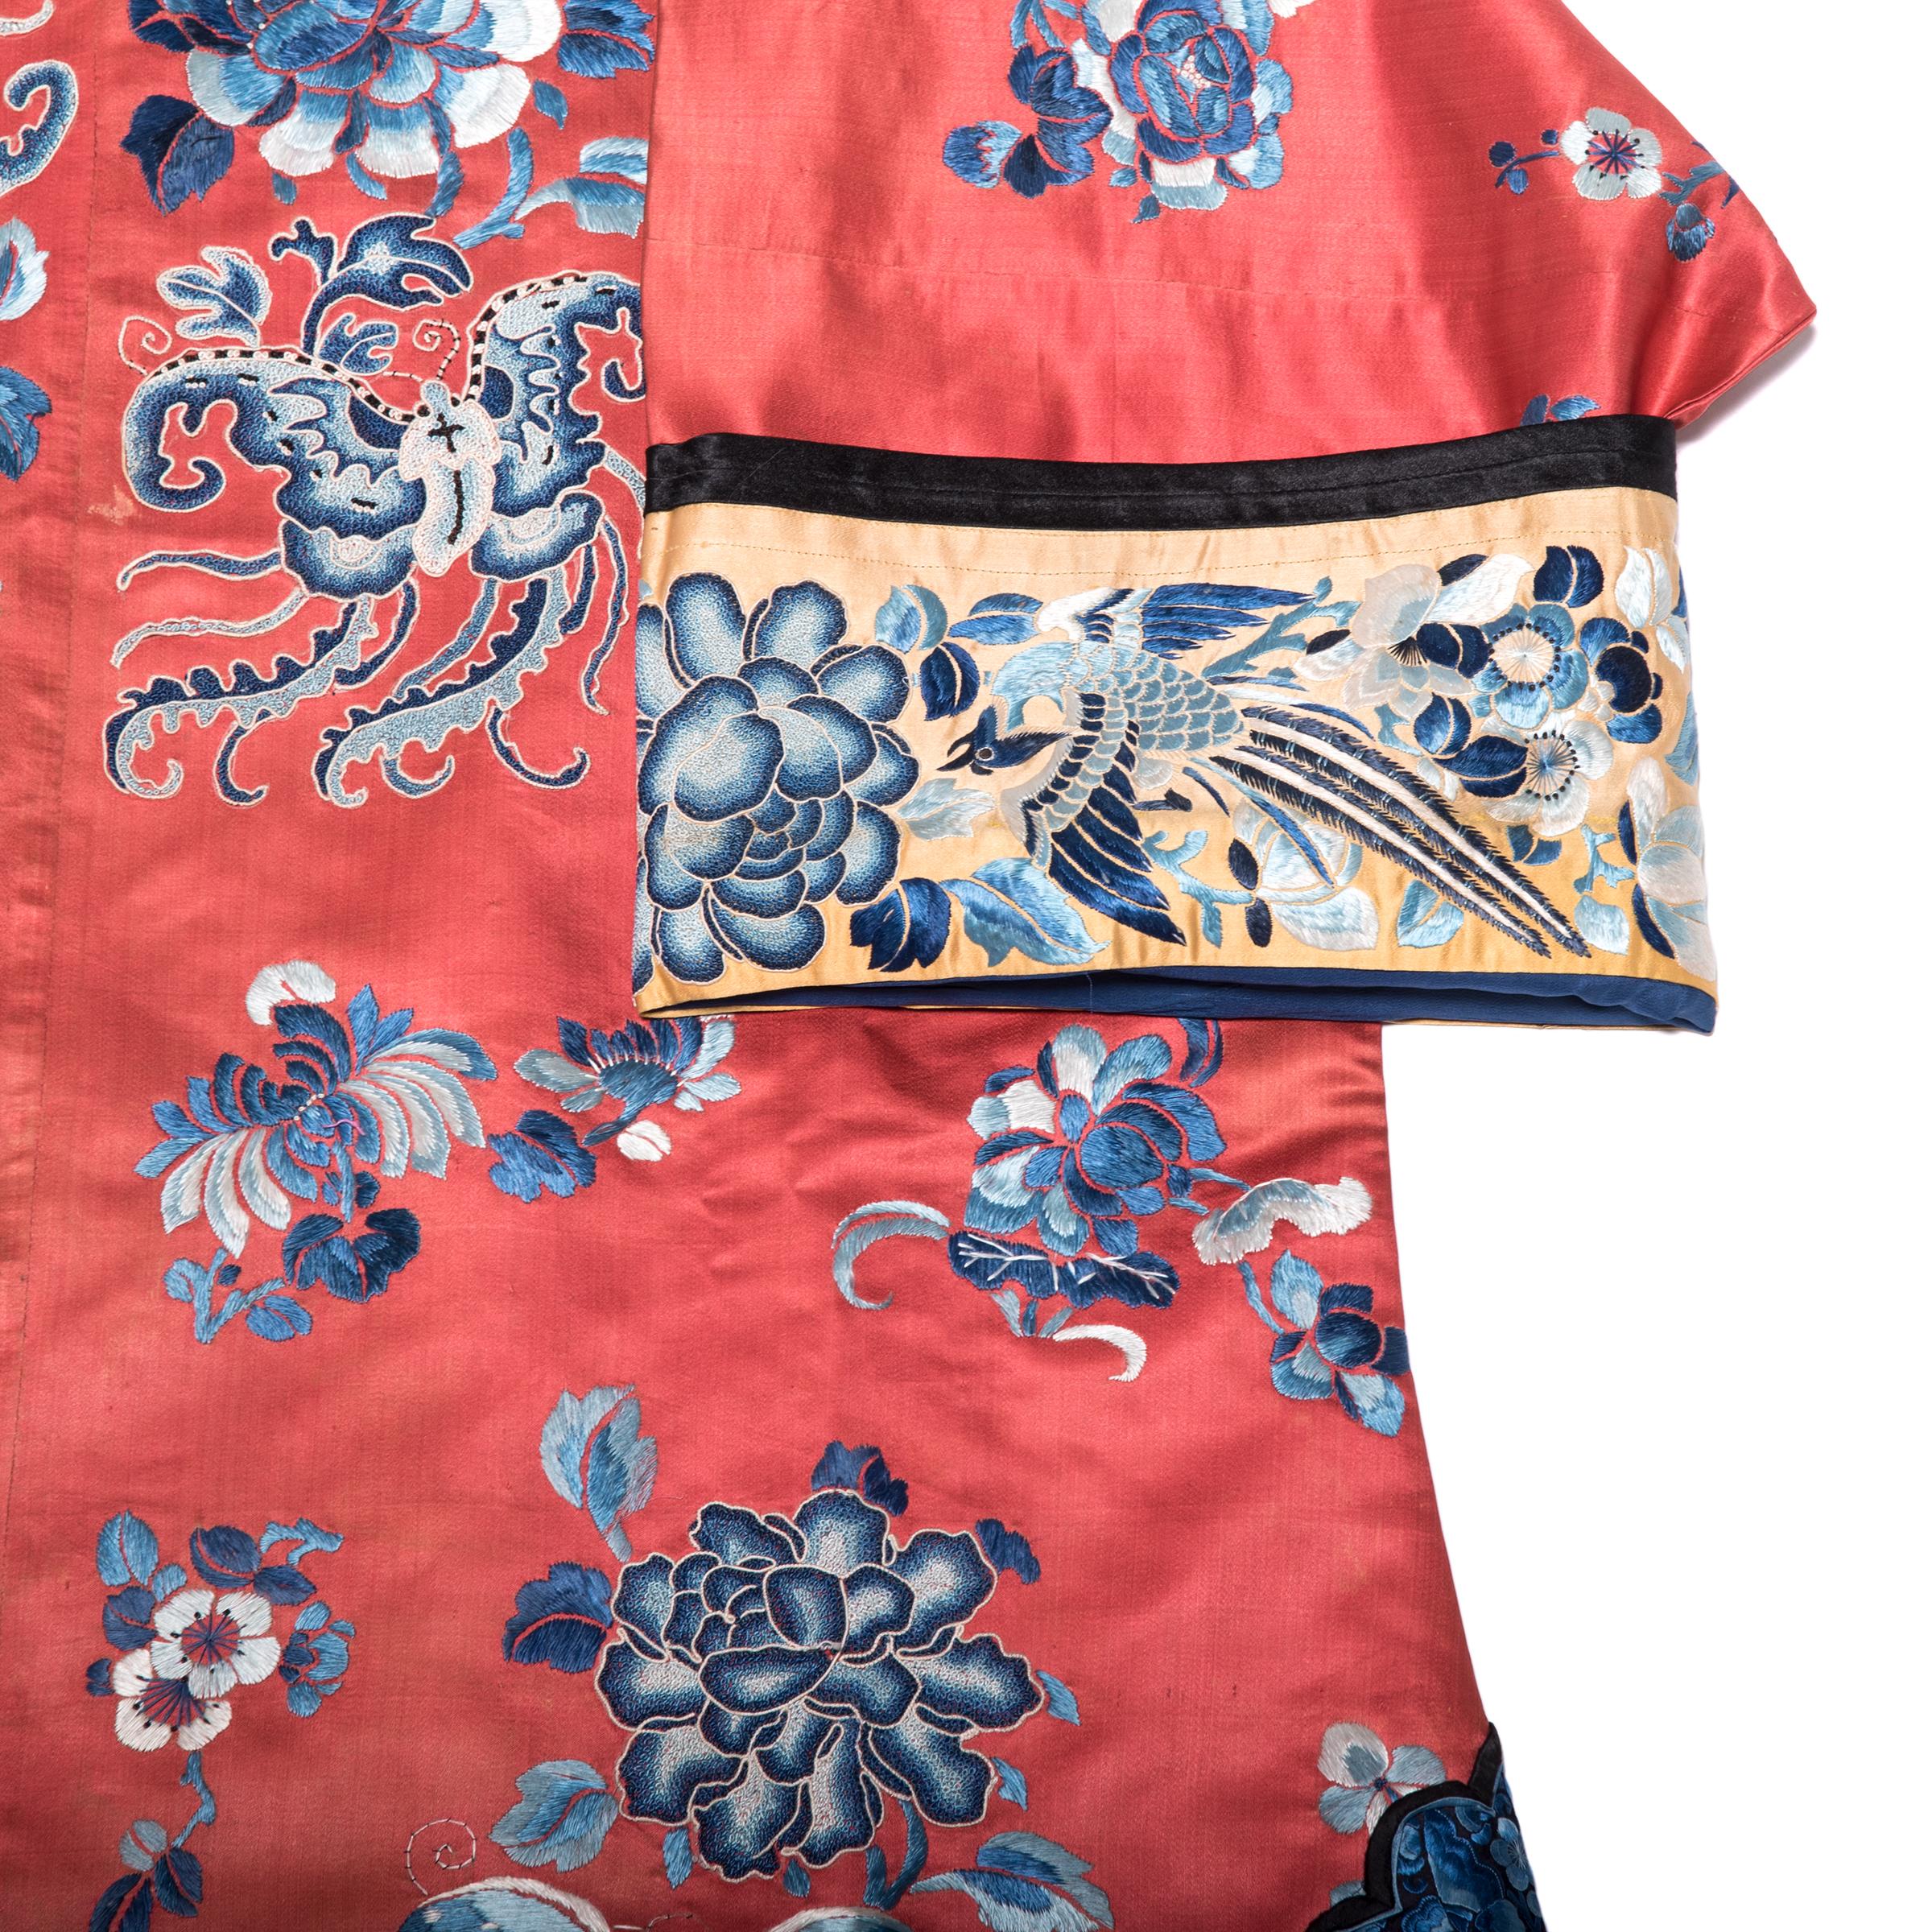 Qing Chinese Silk Lady's Jacket, c. 1900